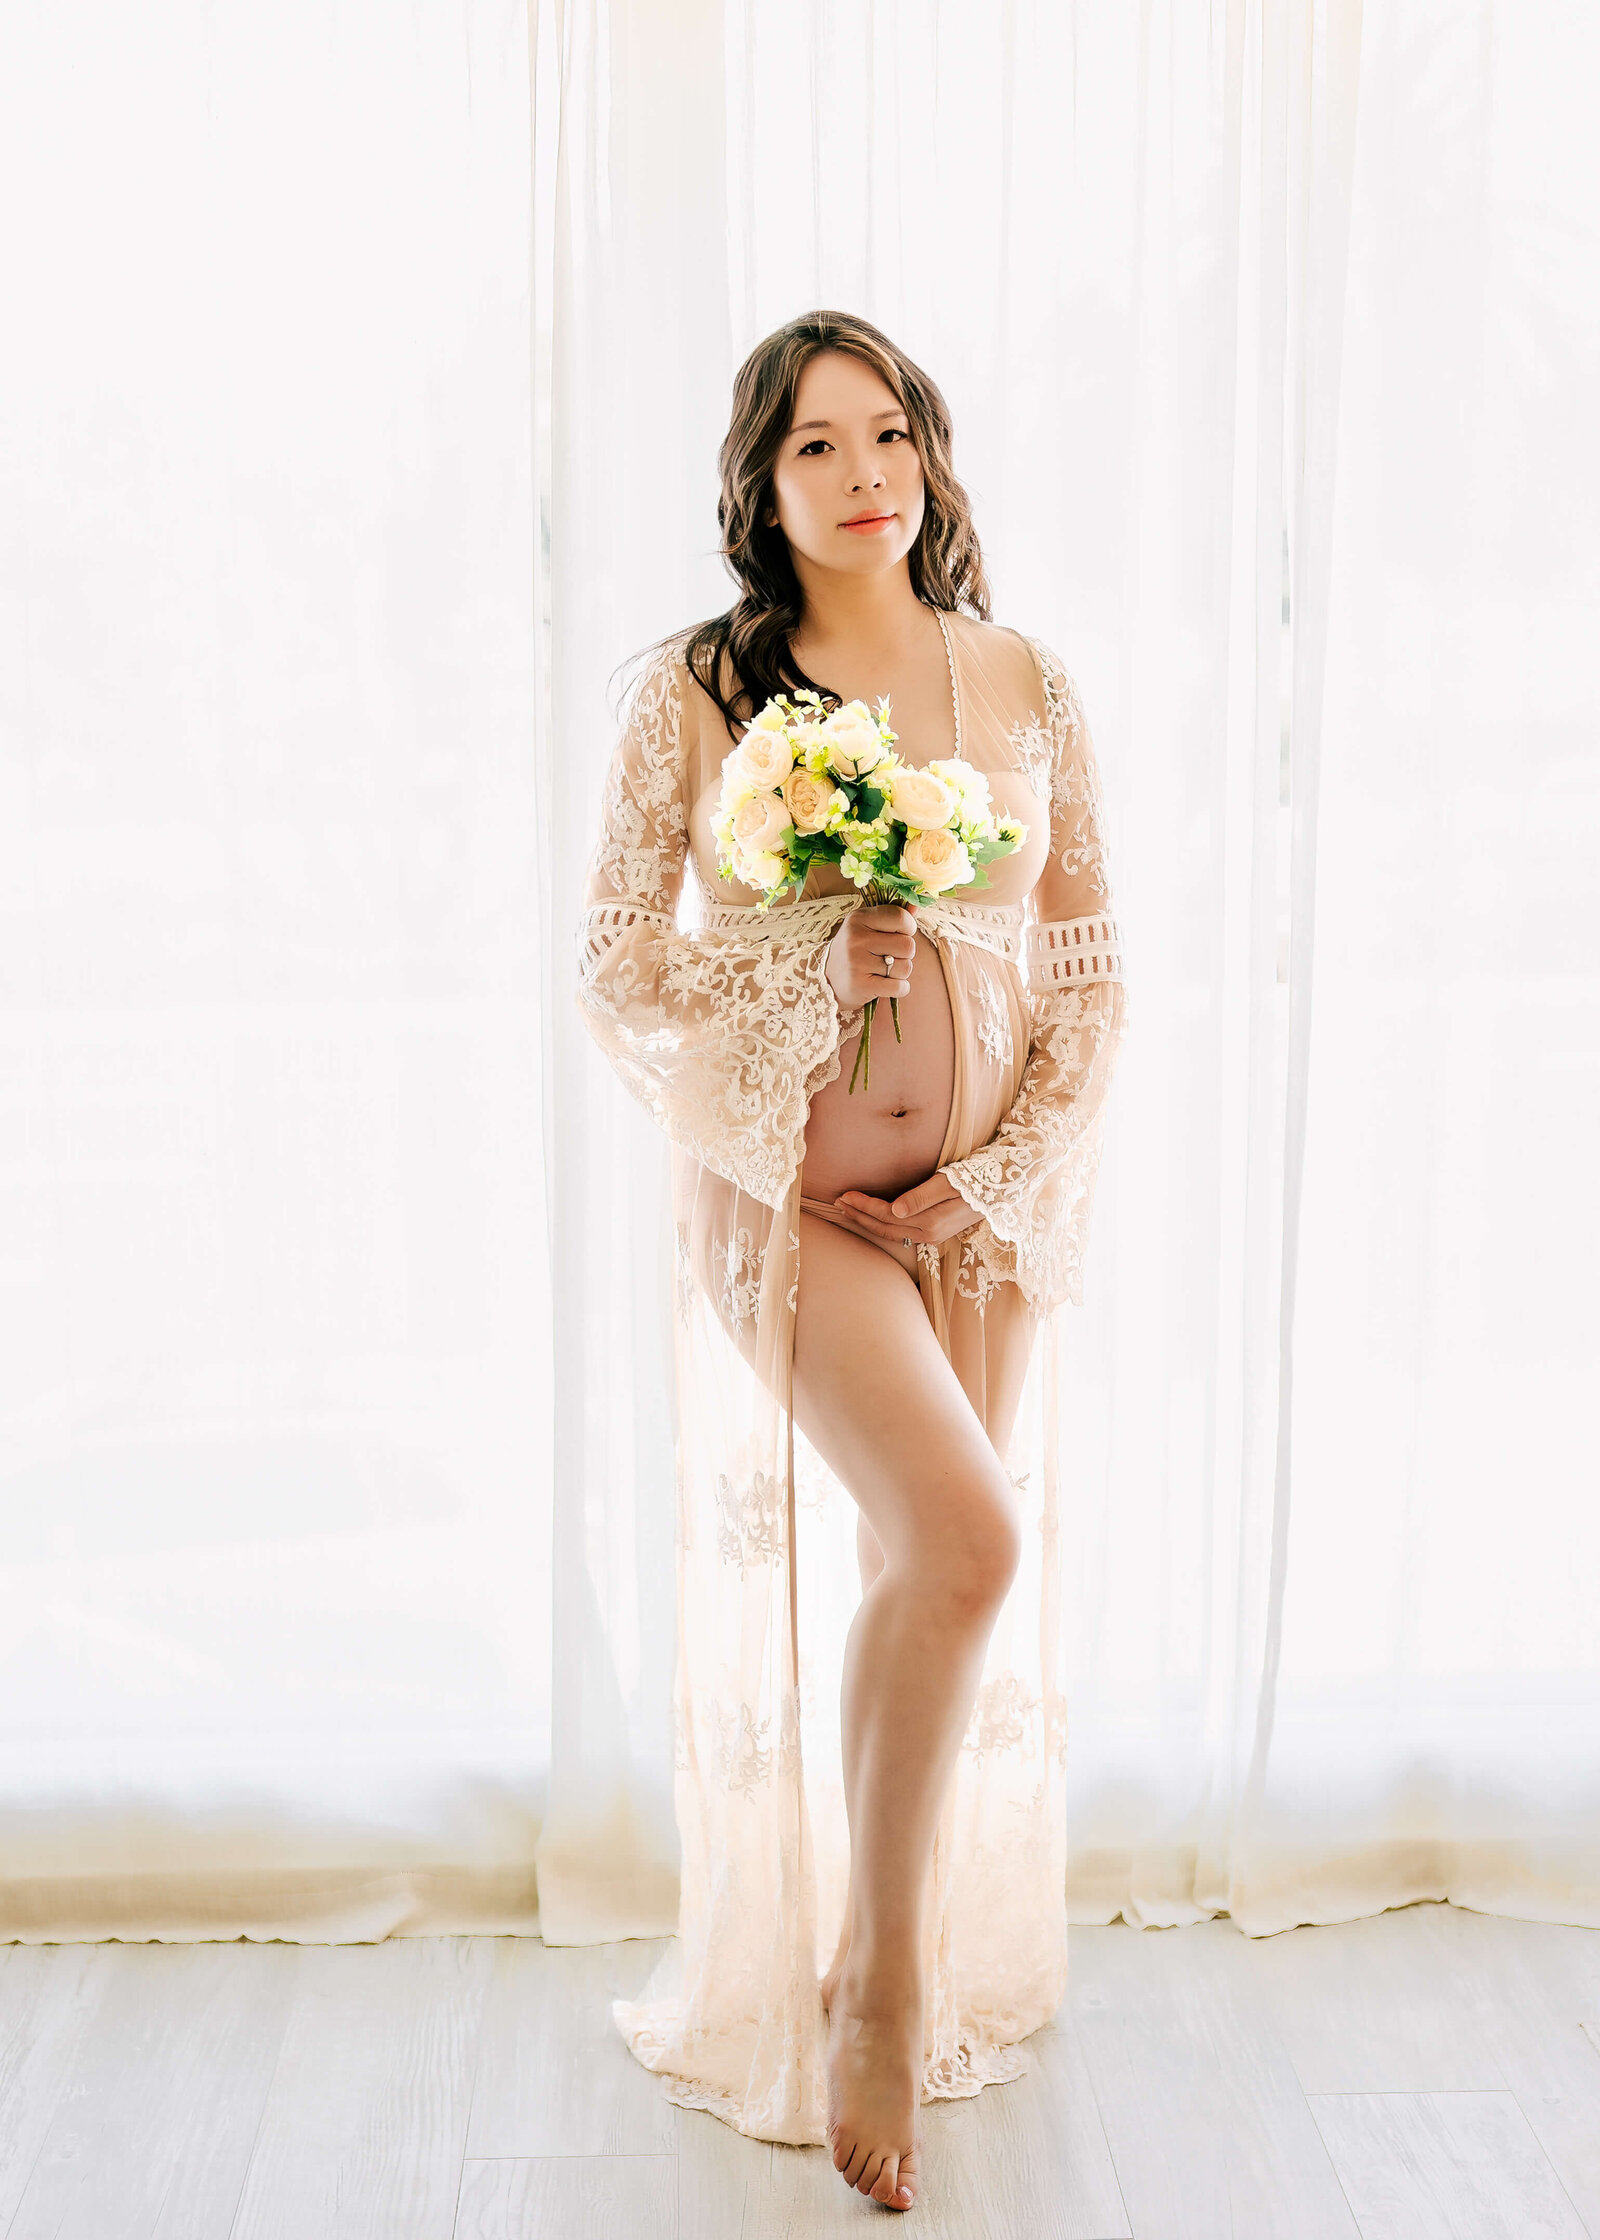 Expectant Mom wearing lace kimono and holding flowers during her studio maternity session by Ashley Nicole Photography.